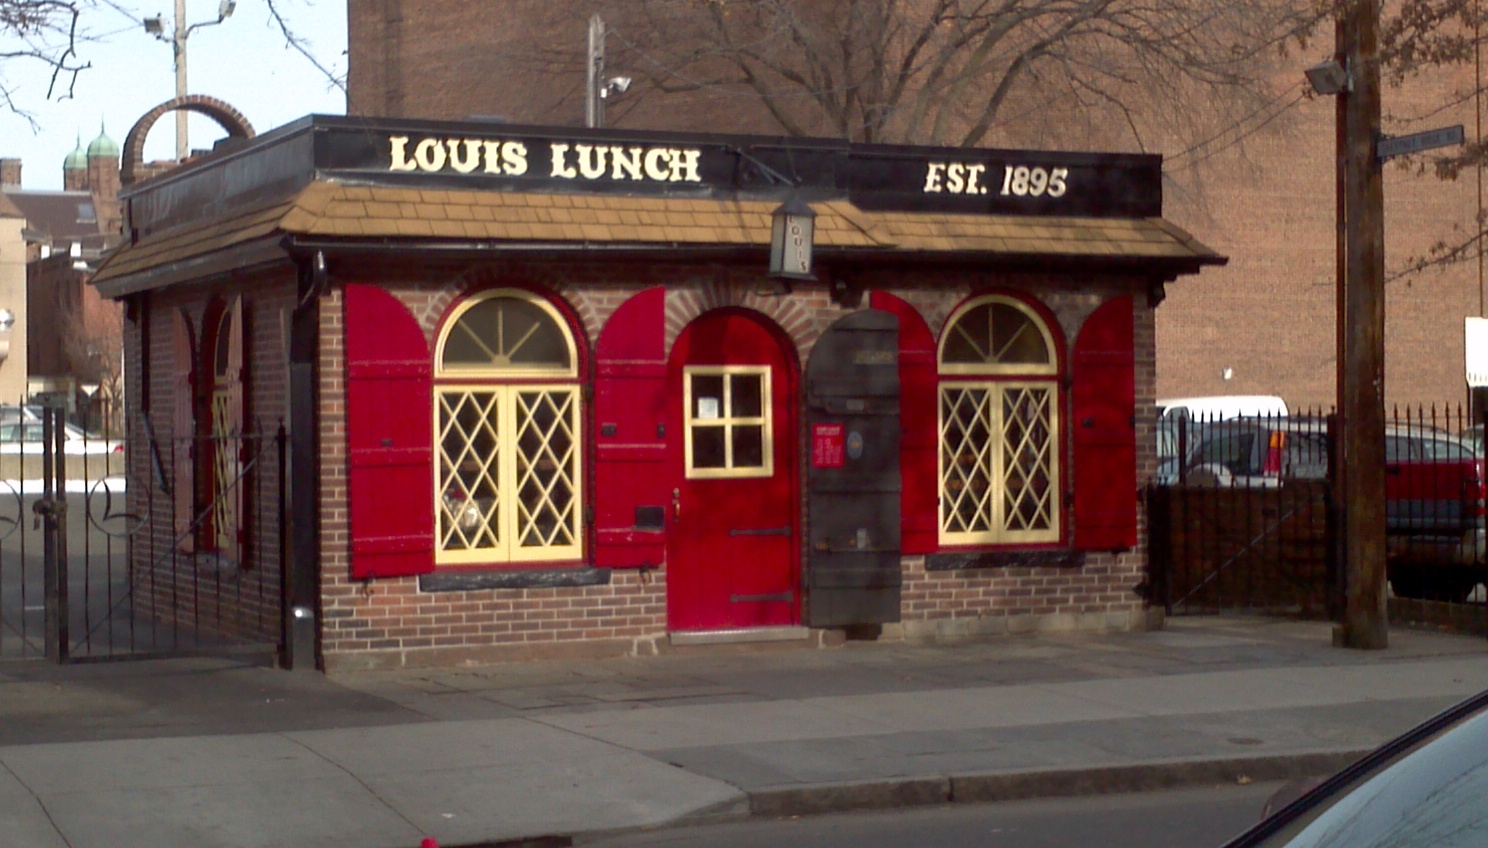 Food Plus Beer: Louis Lunch - The First Hamburger Sandwich